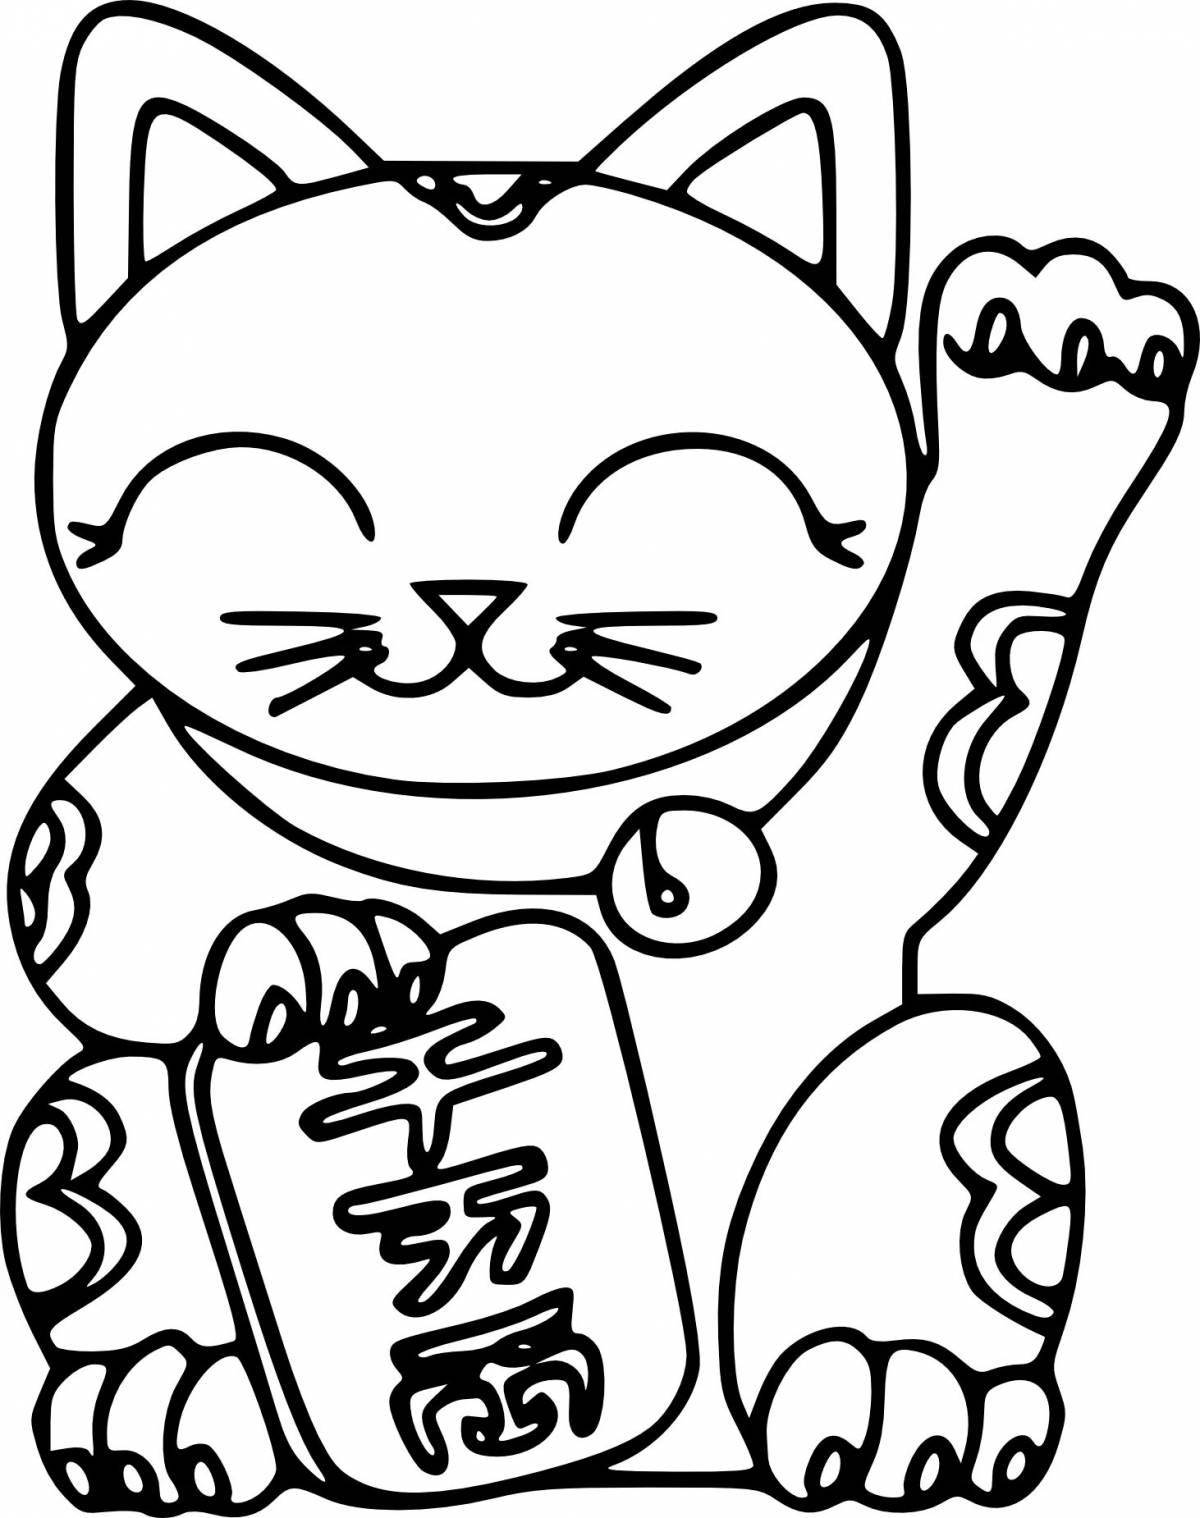 Adorable cat toy coloring page